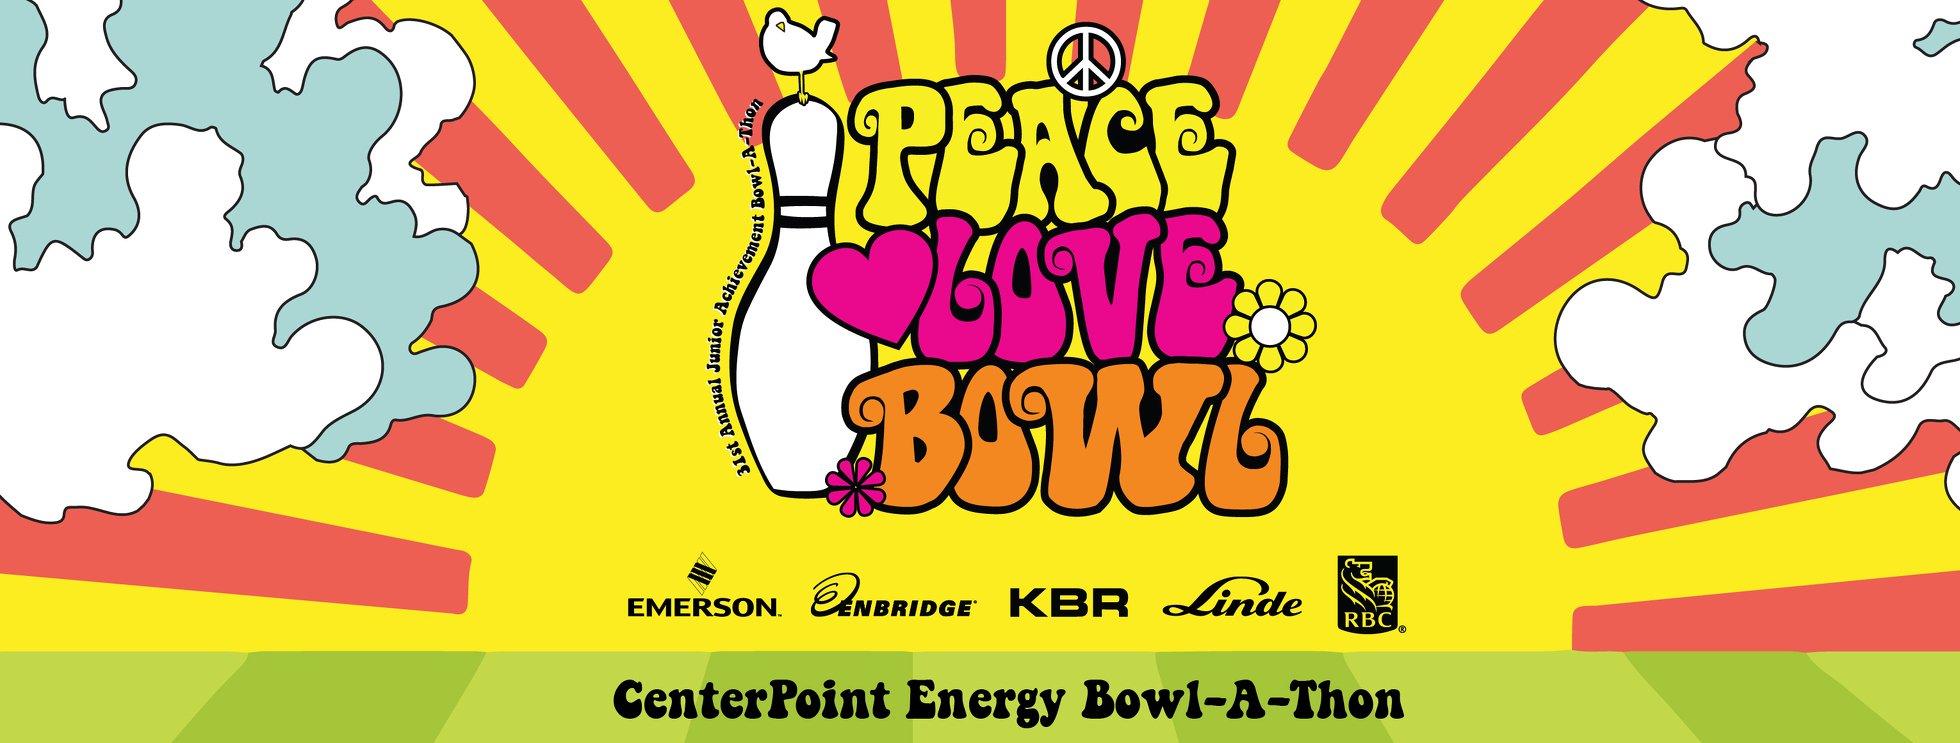 CenterPoint Energy Bowl-A-Thon